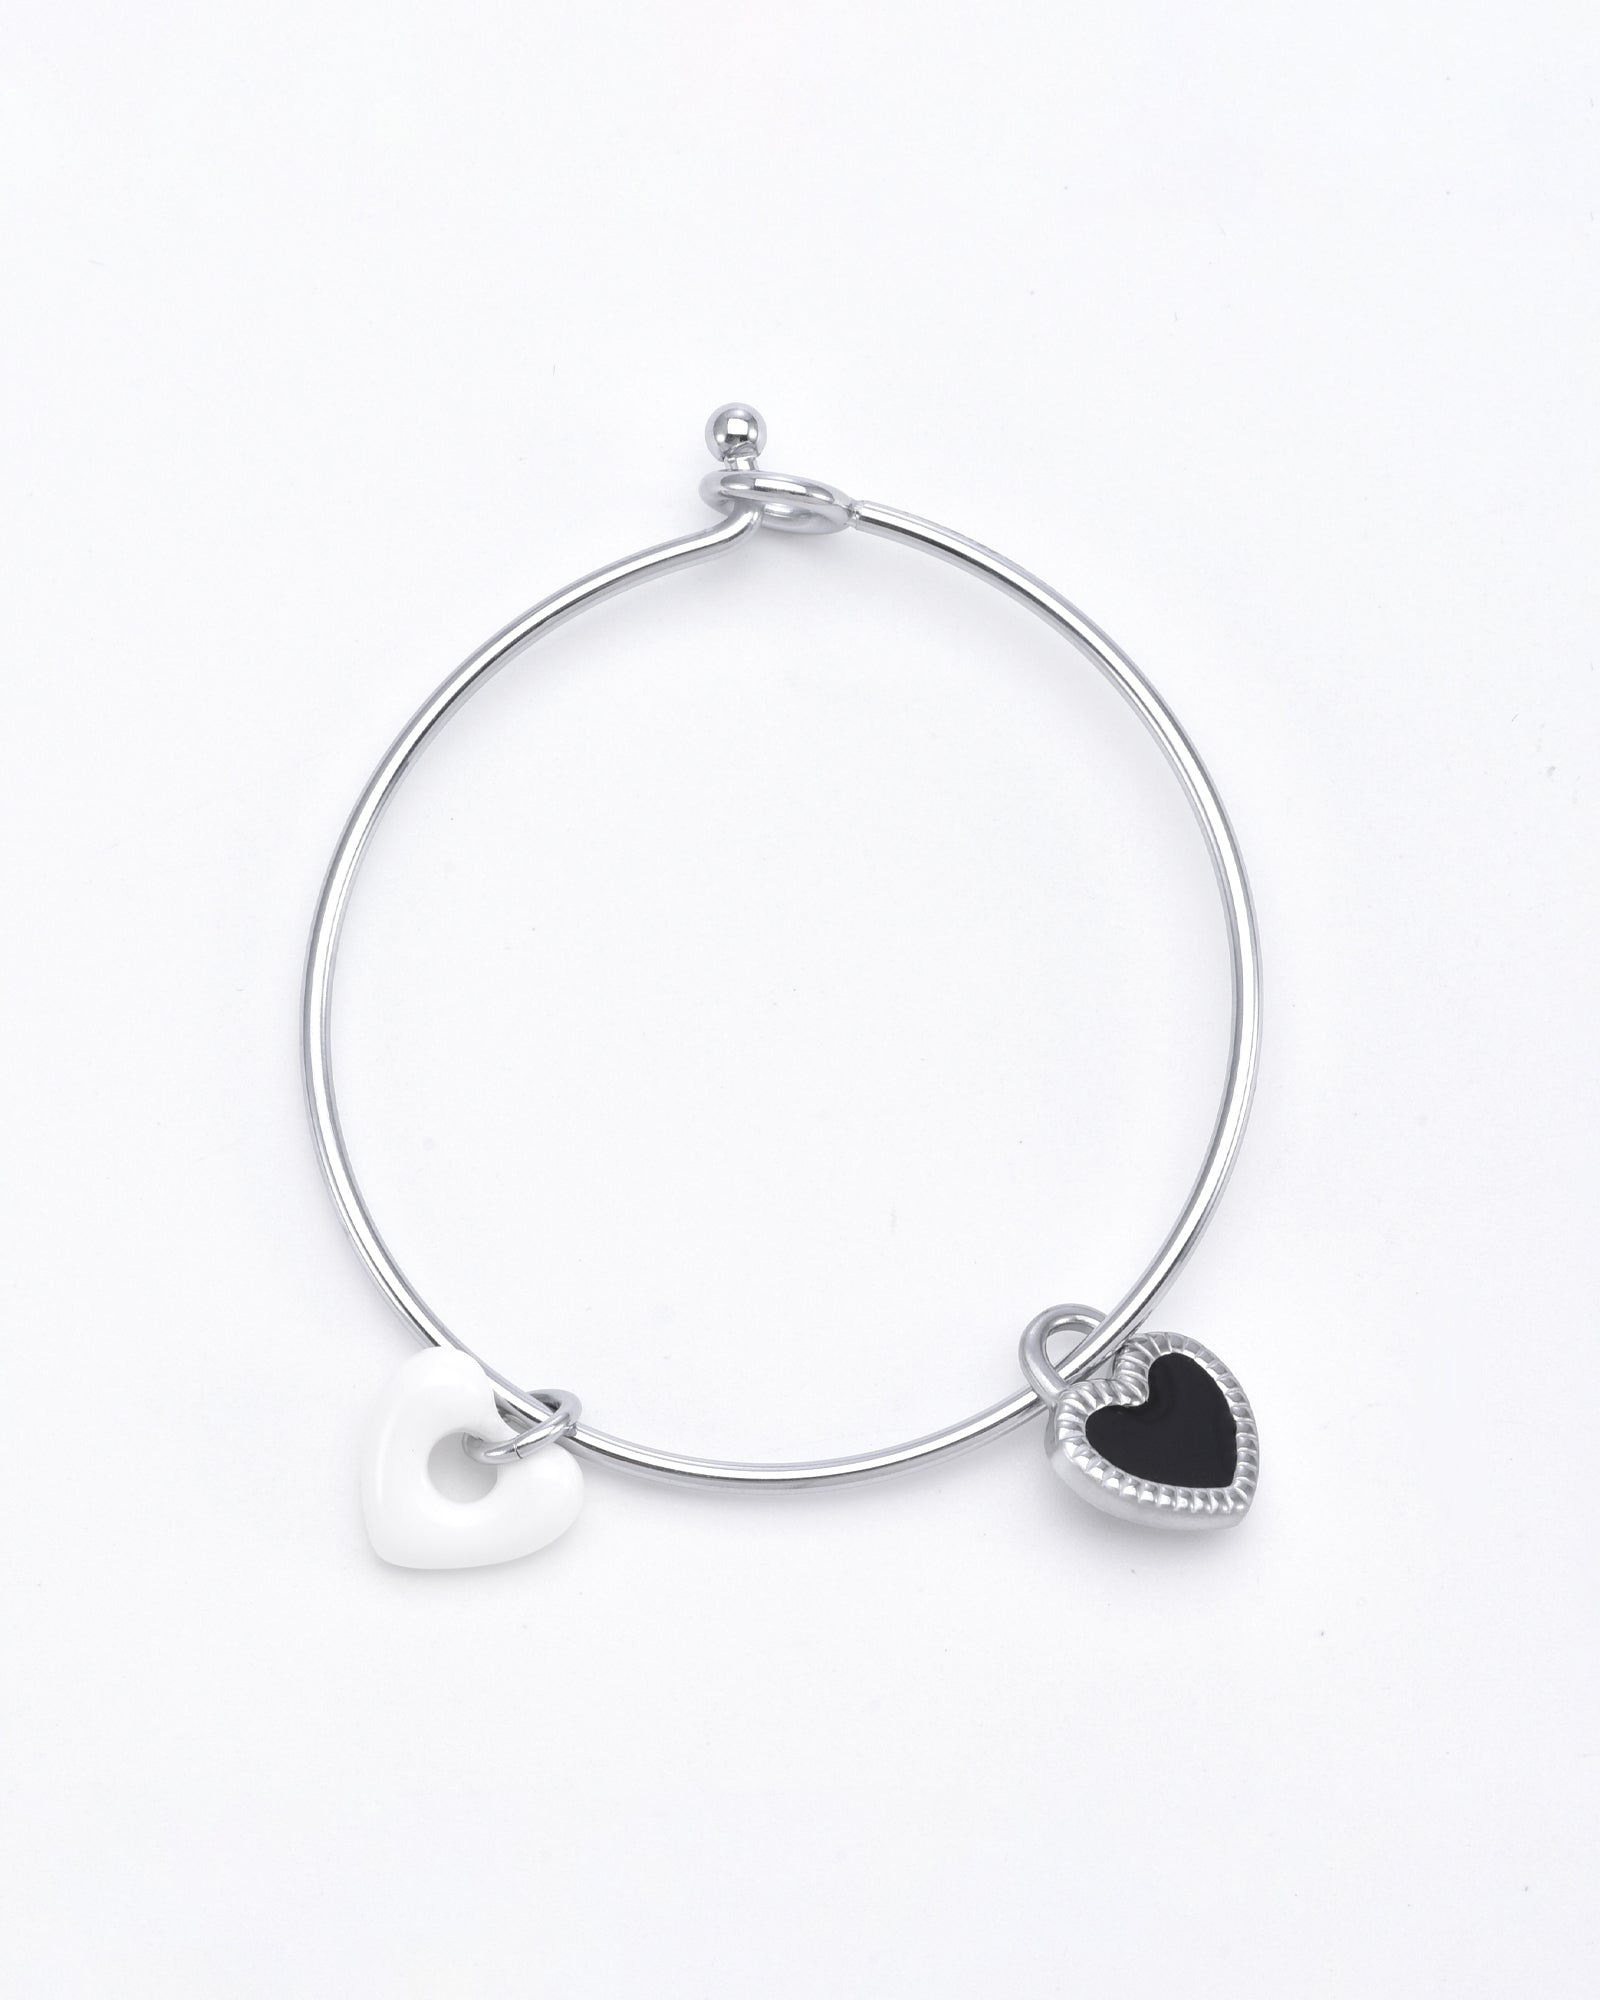 Simple silver bracelet with two heart-shaped charms: one white and one black with a silver outline. This elegant Double Heart Bracelet Silver by For Art's Sake® features a small clasp and is displayed against a white background.